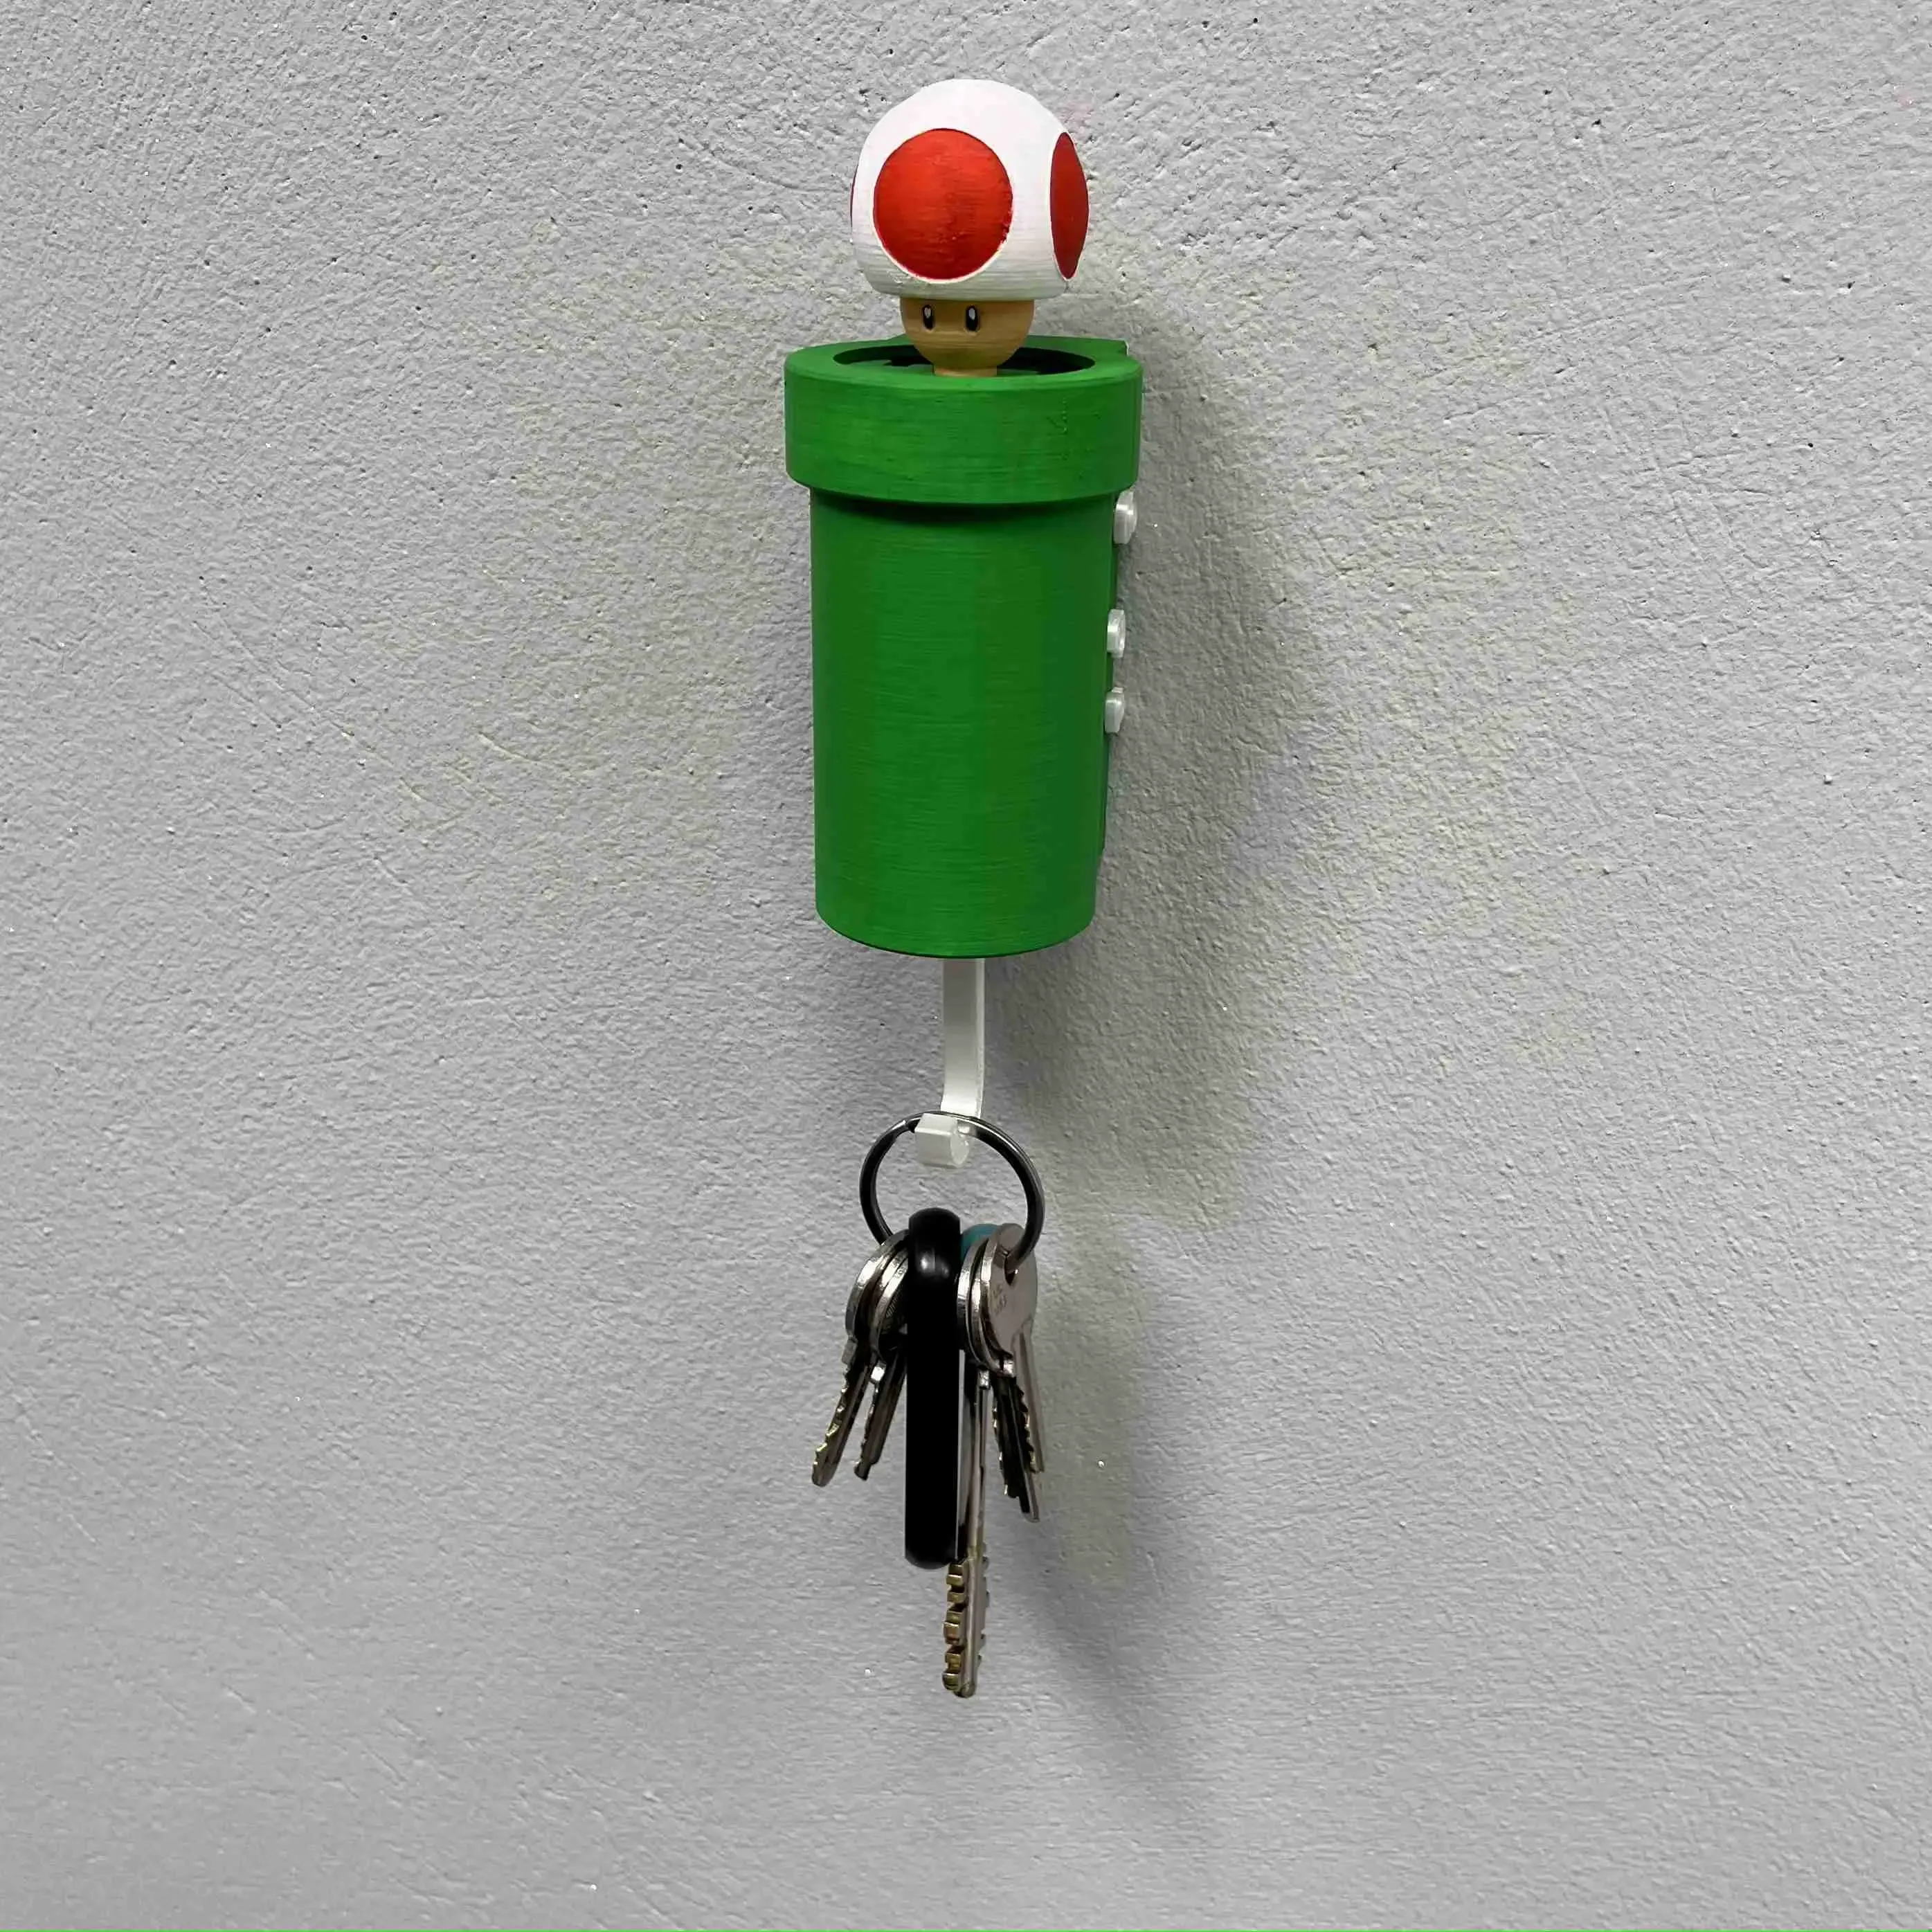 TOAD KEY HANGER SUPER MARIO WALL MOUNTED for HOME FAMILY